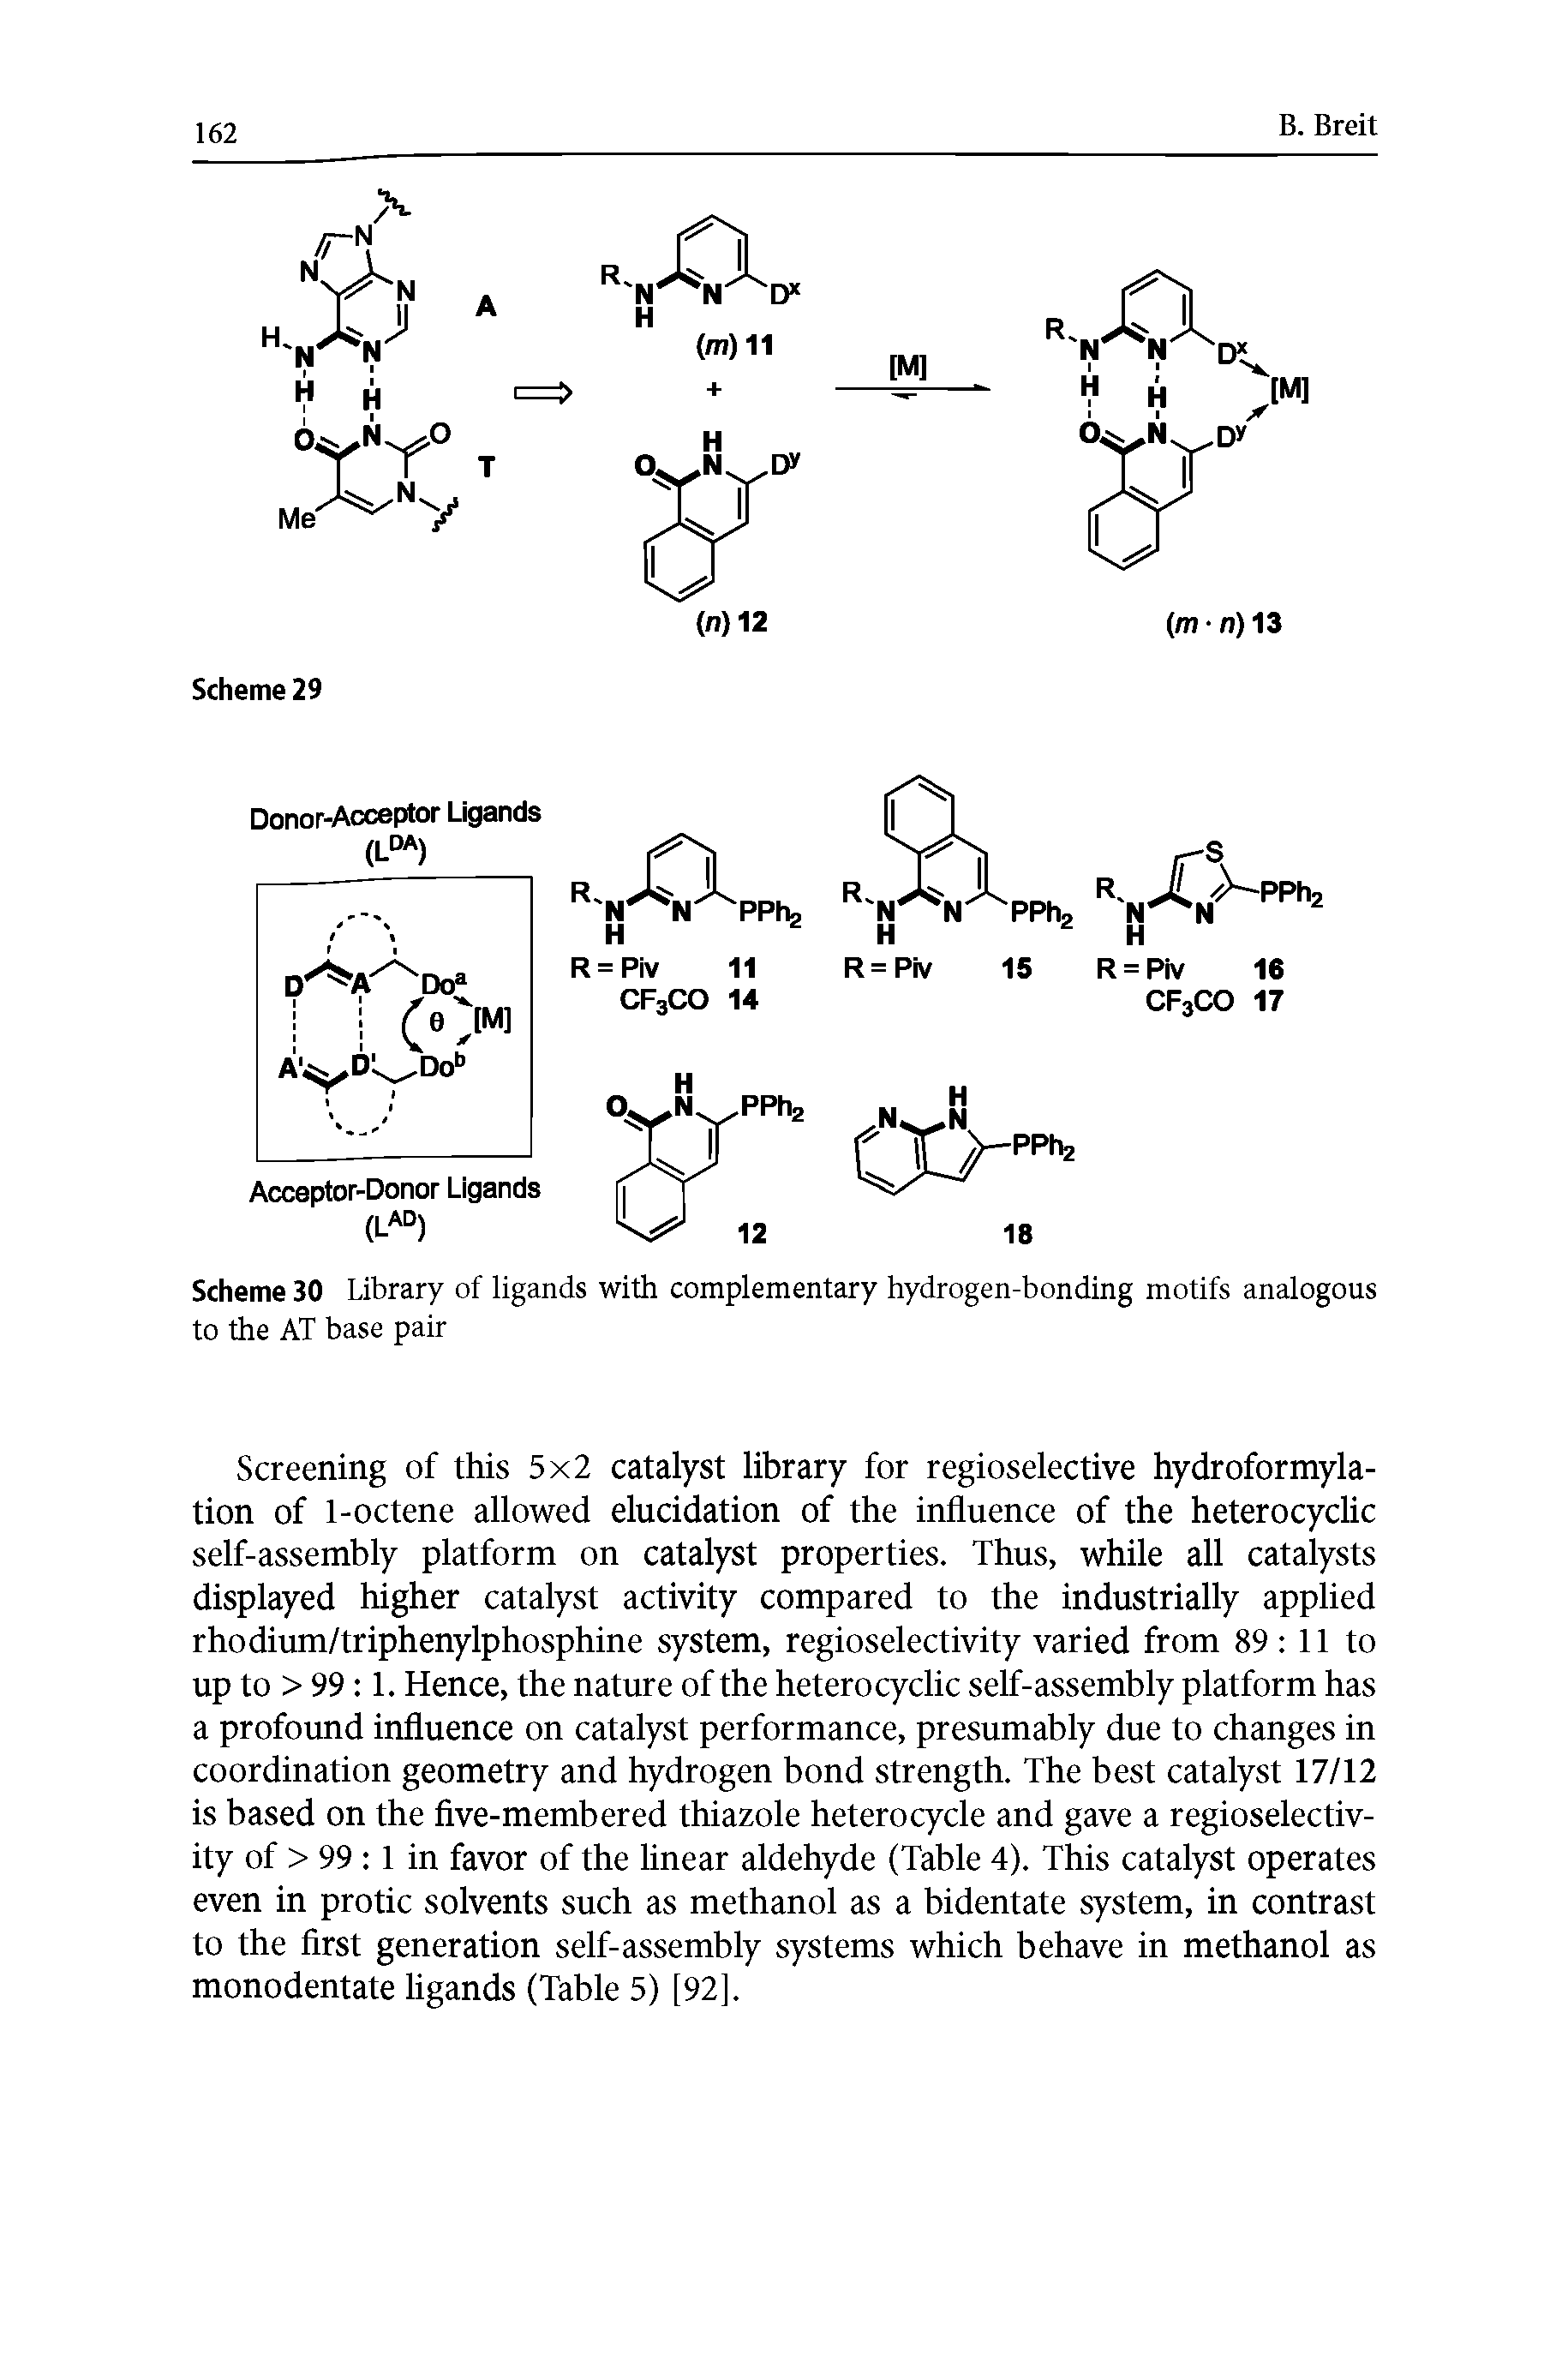 Scheme 30 Library of ligands with complementary hydrogen-bonding motifs analogous to the AT base pair...